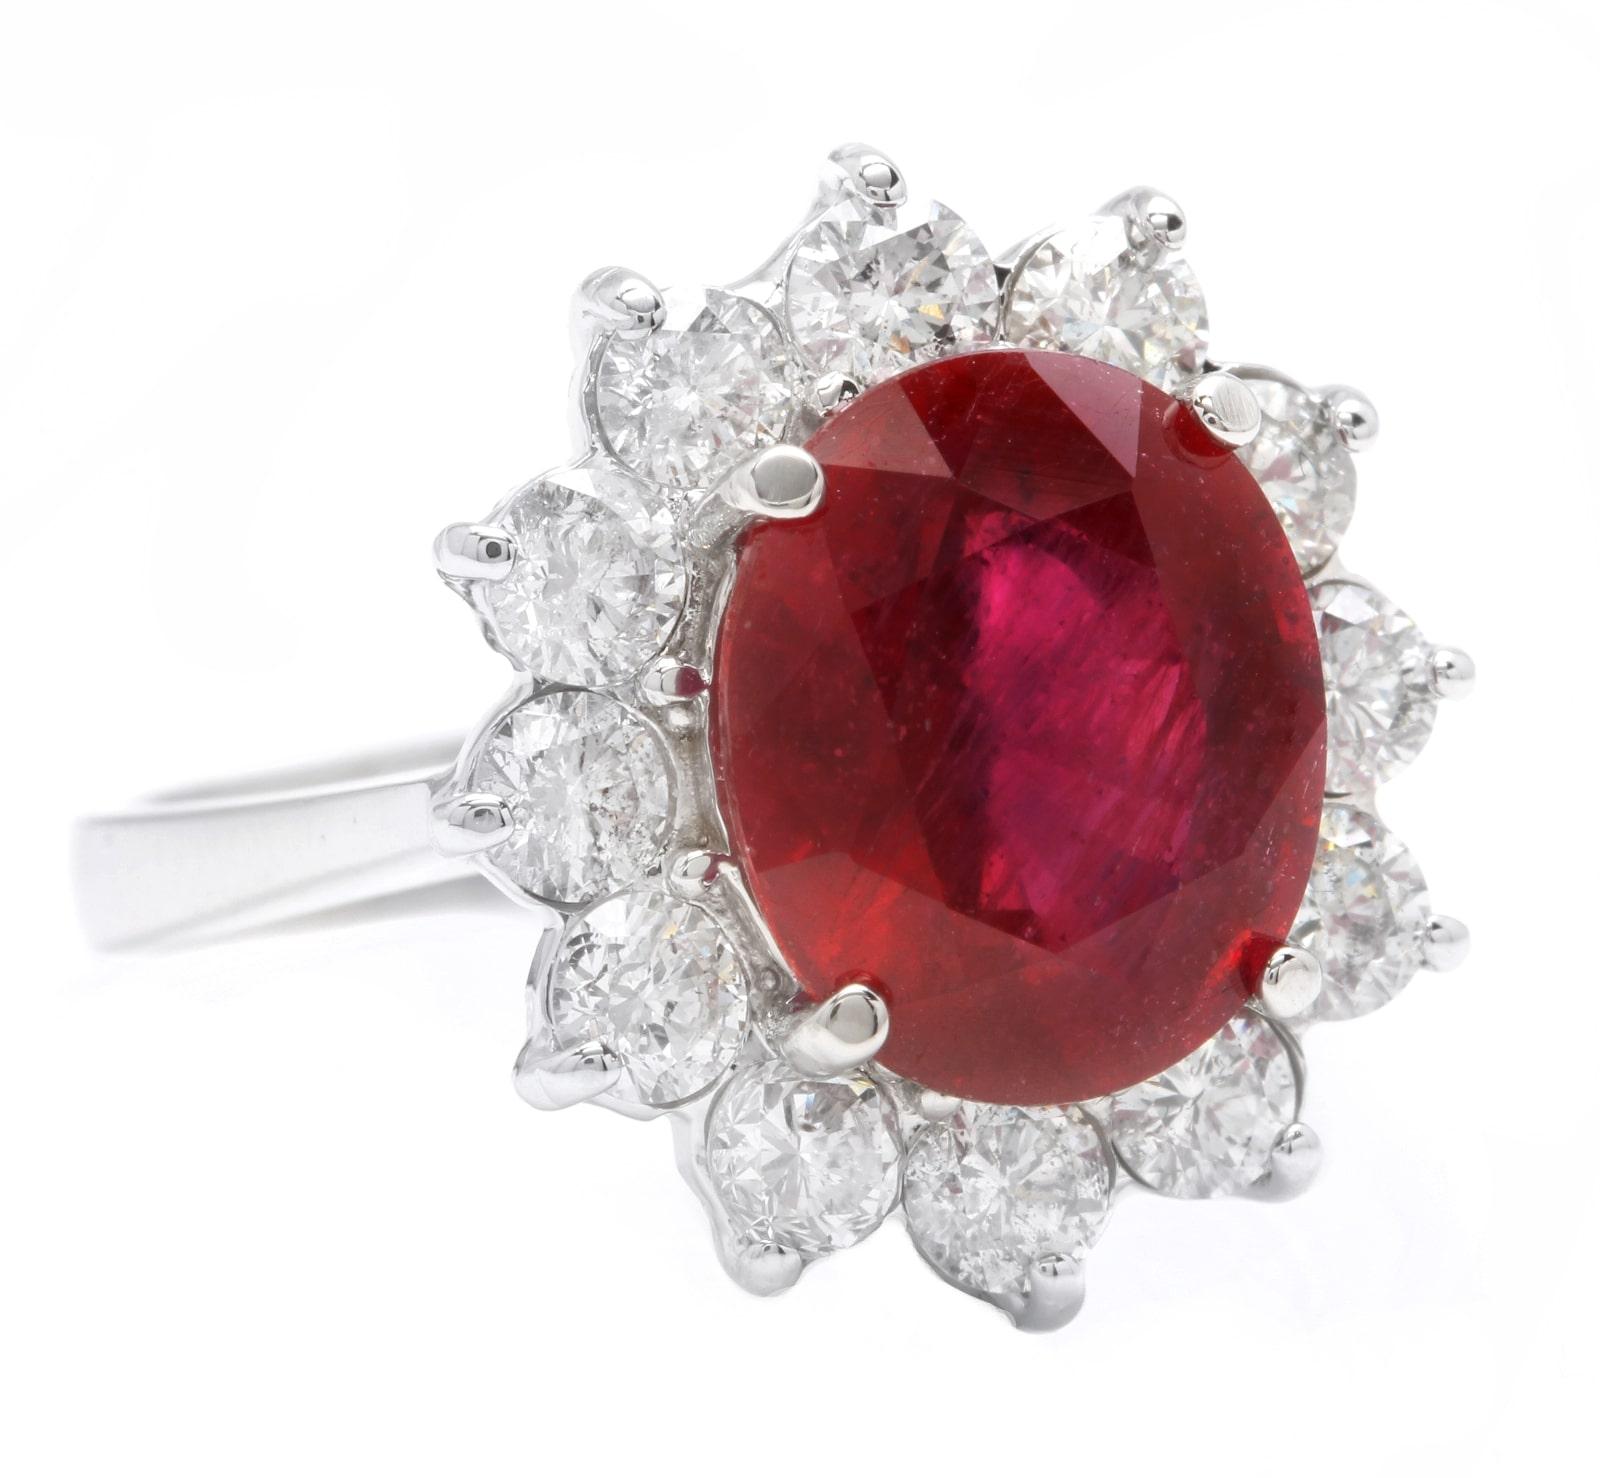 7.60 Carats Impressive Red Ruby and Diamond 14K Solid White Gold Ring

Suggested Replacement Value $6,000.00

Total Red Ruby Weight is: Approx. 6.00 Carats 

Ruby Measures: 11x 9mm (Lead Glass Filled)

Natural Untreated Round Diamonds Weight: 1.60